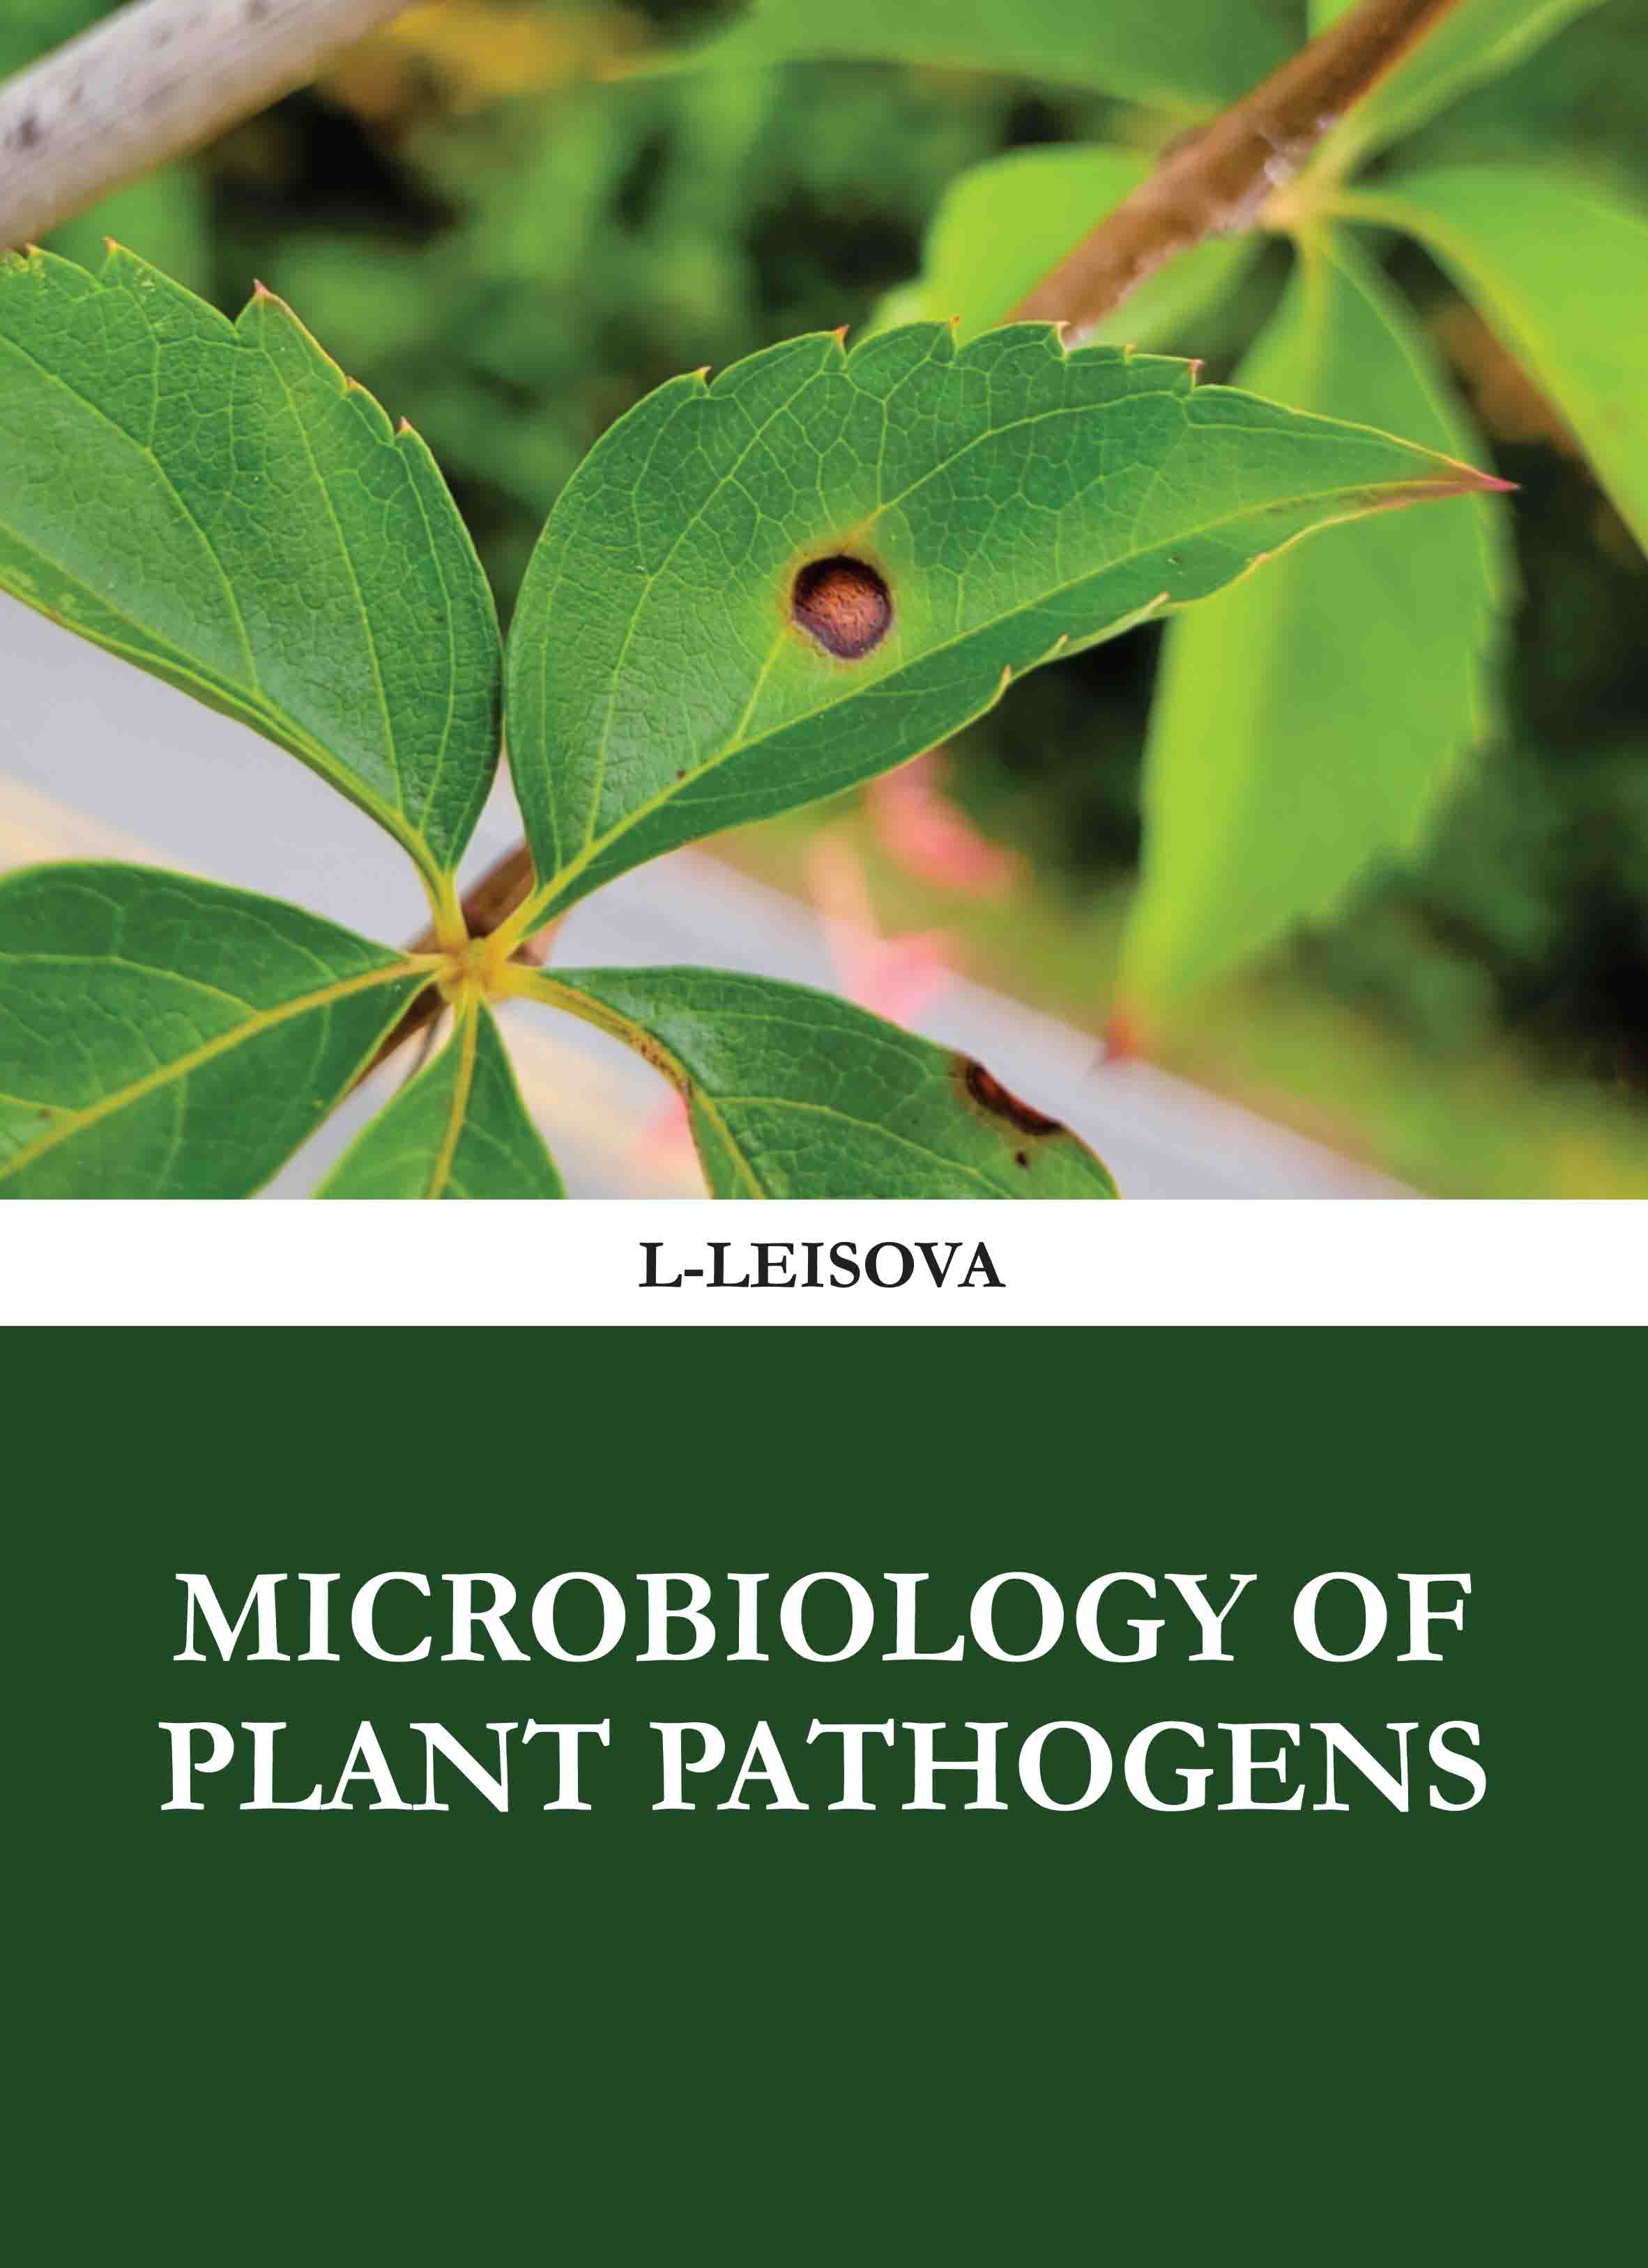 Microbiology of Plant Pathogens